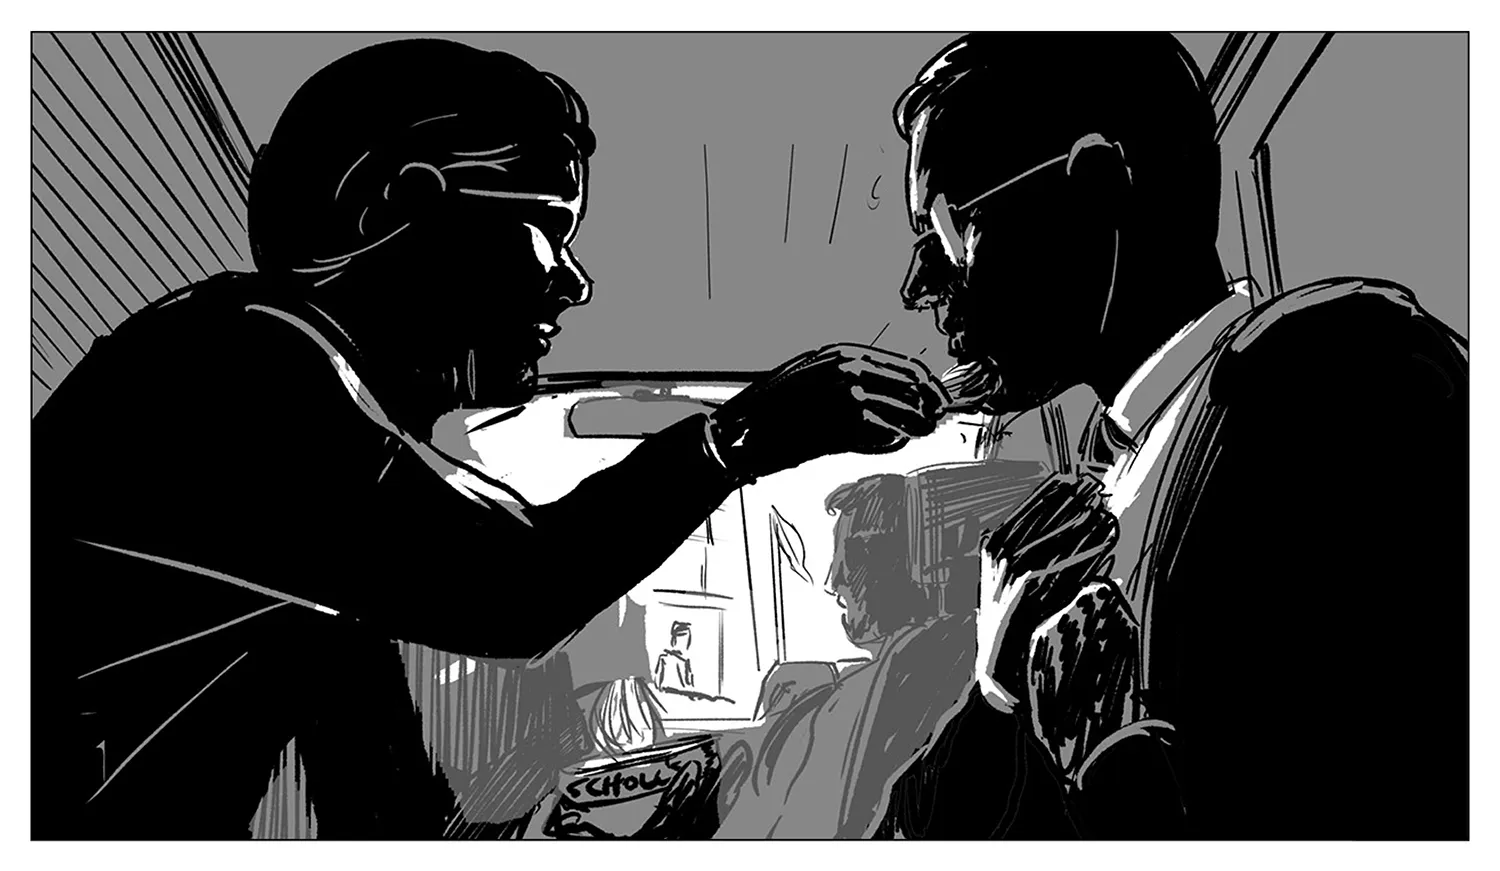 Mendez and Tugboat are silhouetted in the back of a van as she works on his disguise, a can of Dr. Scholl’s foot powder in her hand. He adjusts his tie as the van approaches the embassy security guard.